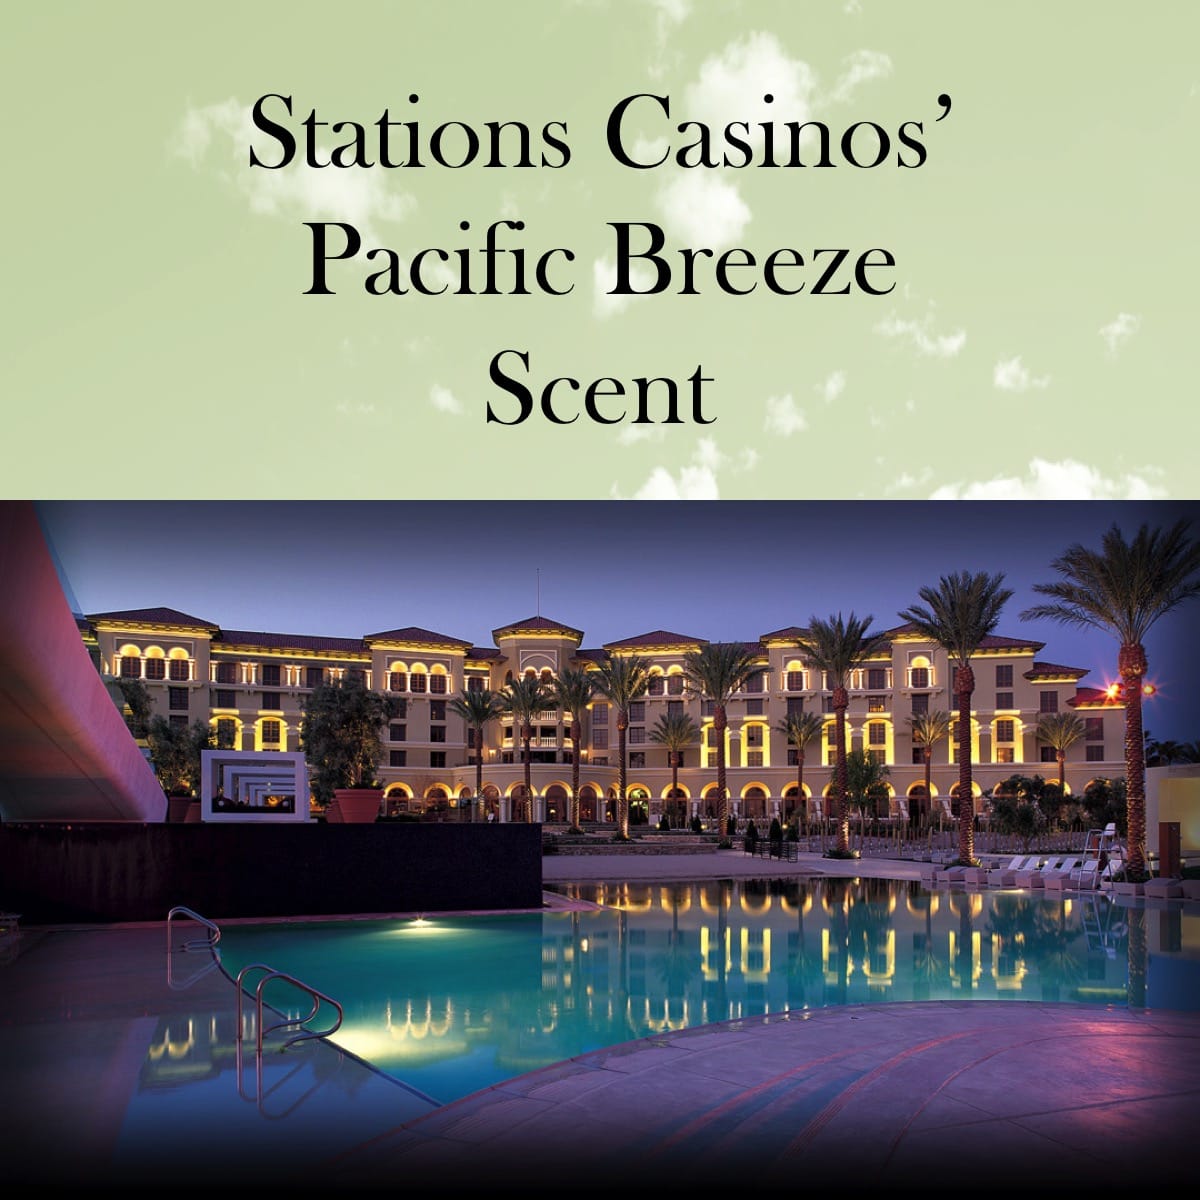 Stations Casinos' Scent